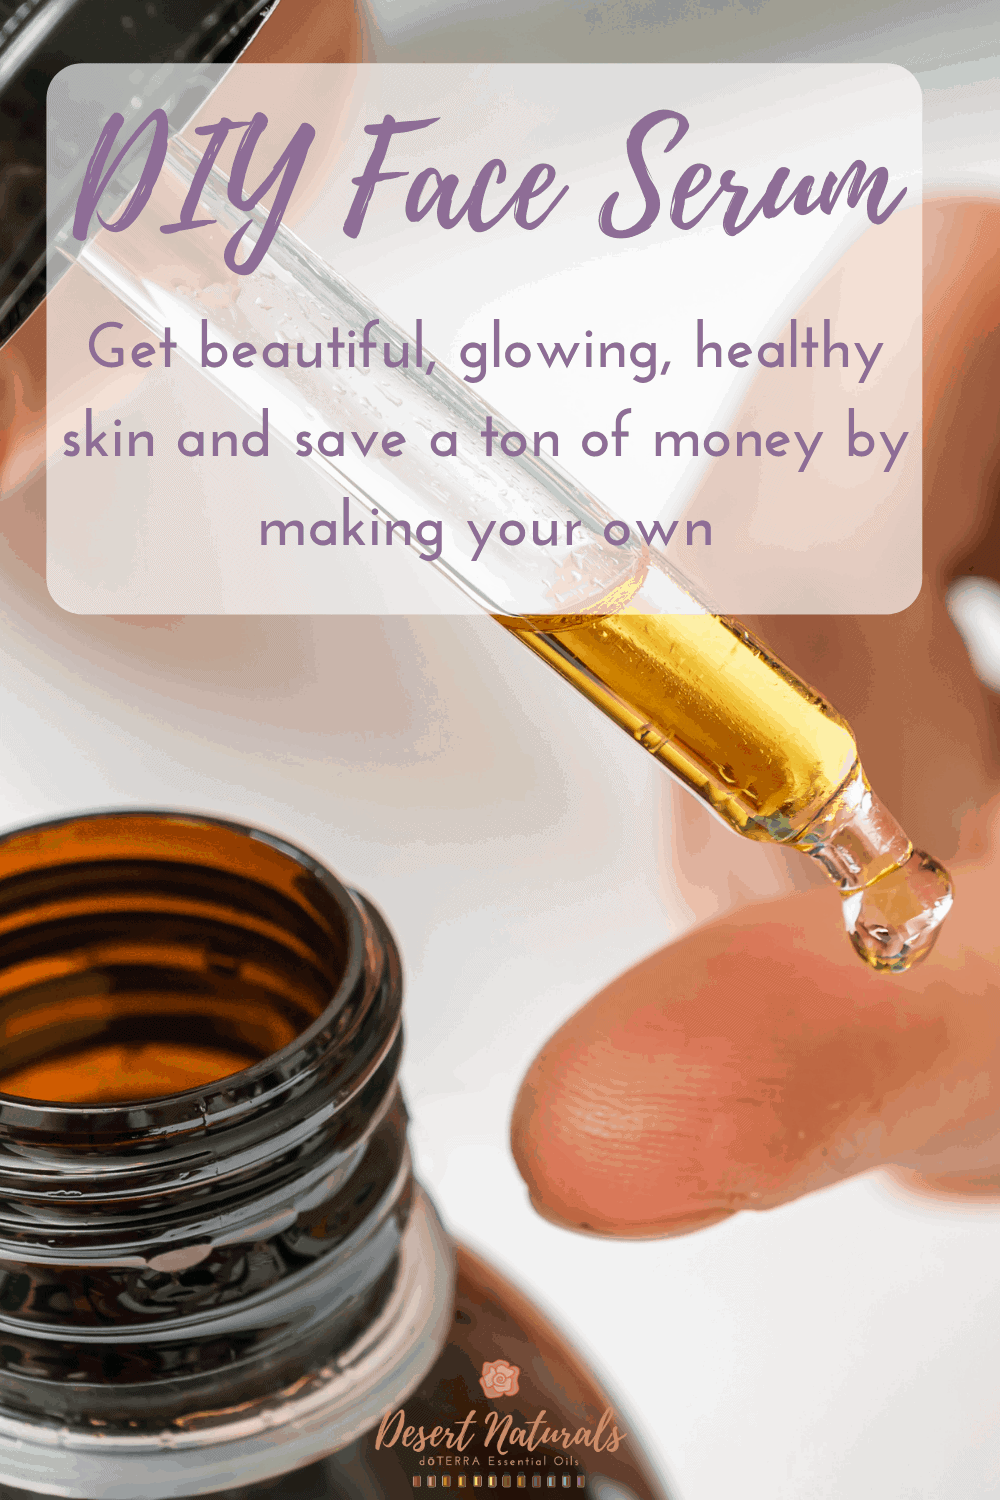 How to make homemade face serum using essential oils for healthy glowing skin